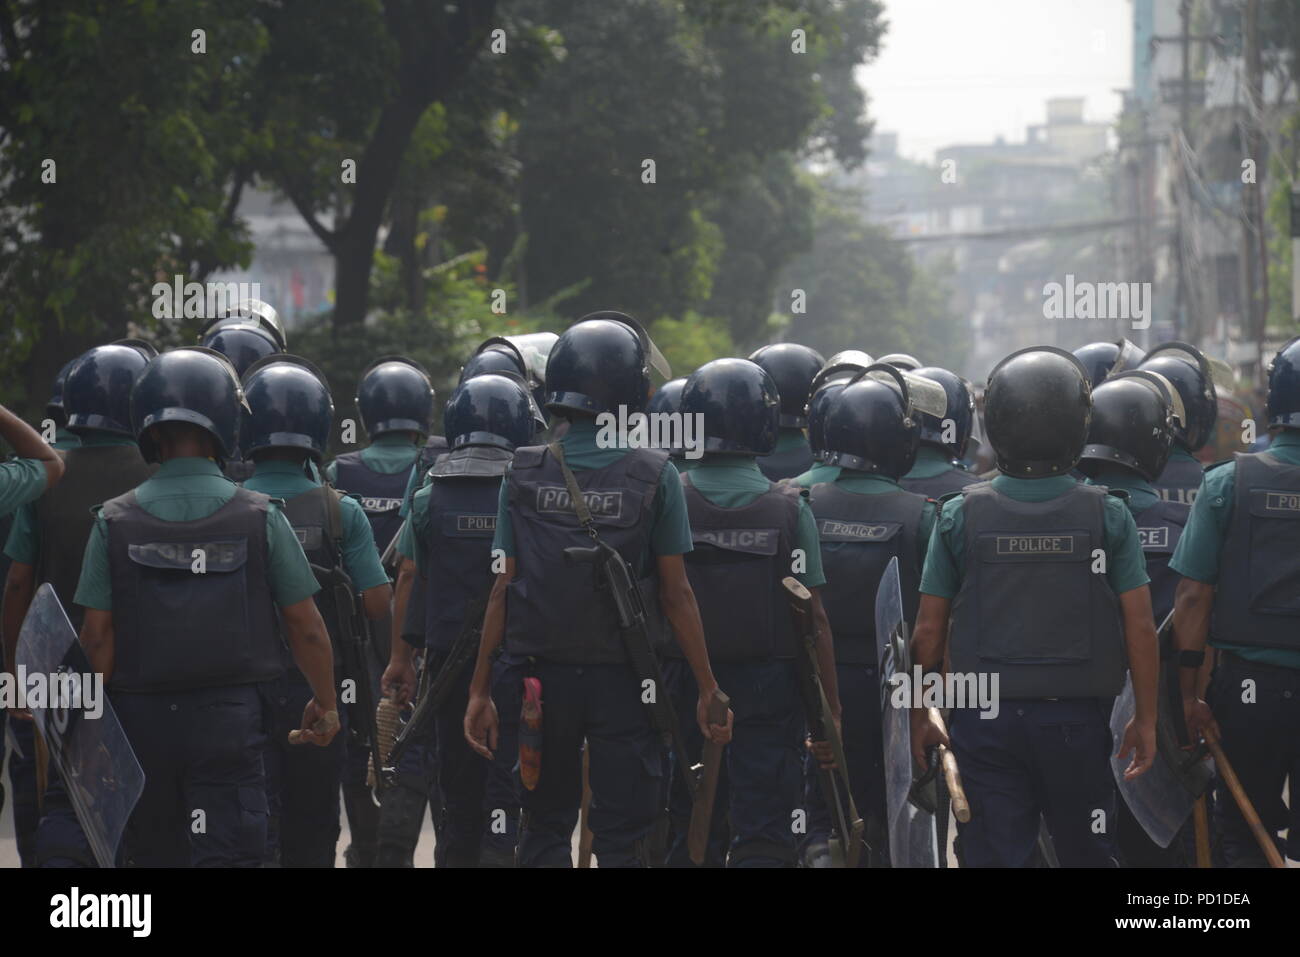 Dhaka. 5th Aug, 2018. Anti-riot policemen stand guard during protest of students on a major road in Dhaka, Bangladesh on Aug. 5, 2018. Credit: Xinhua/Alamy Live News Stock Photo